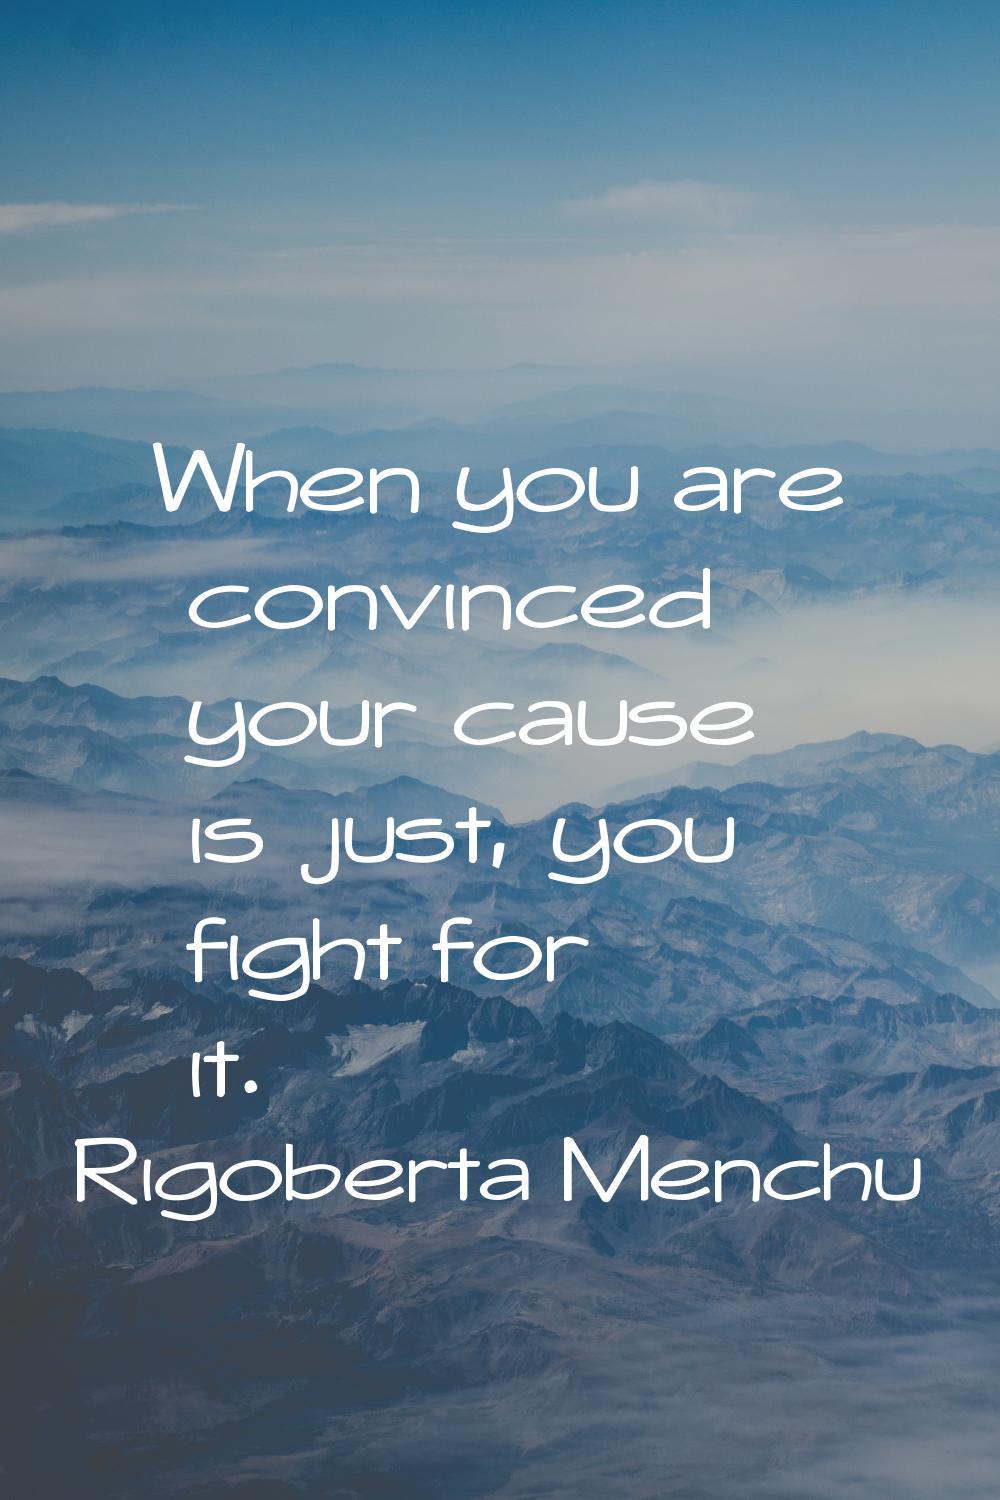 When you are convinced your cause is just, you fight for it.